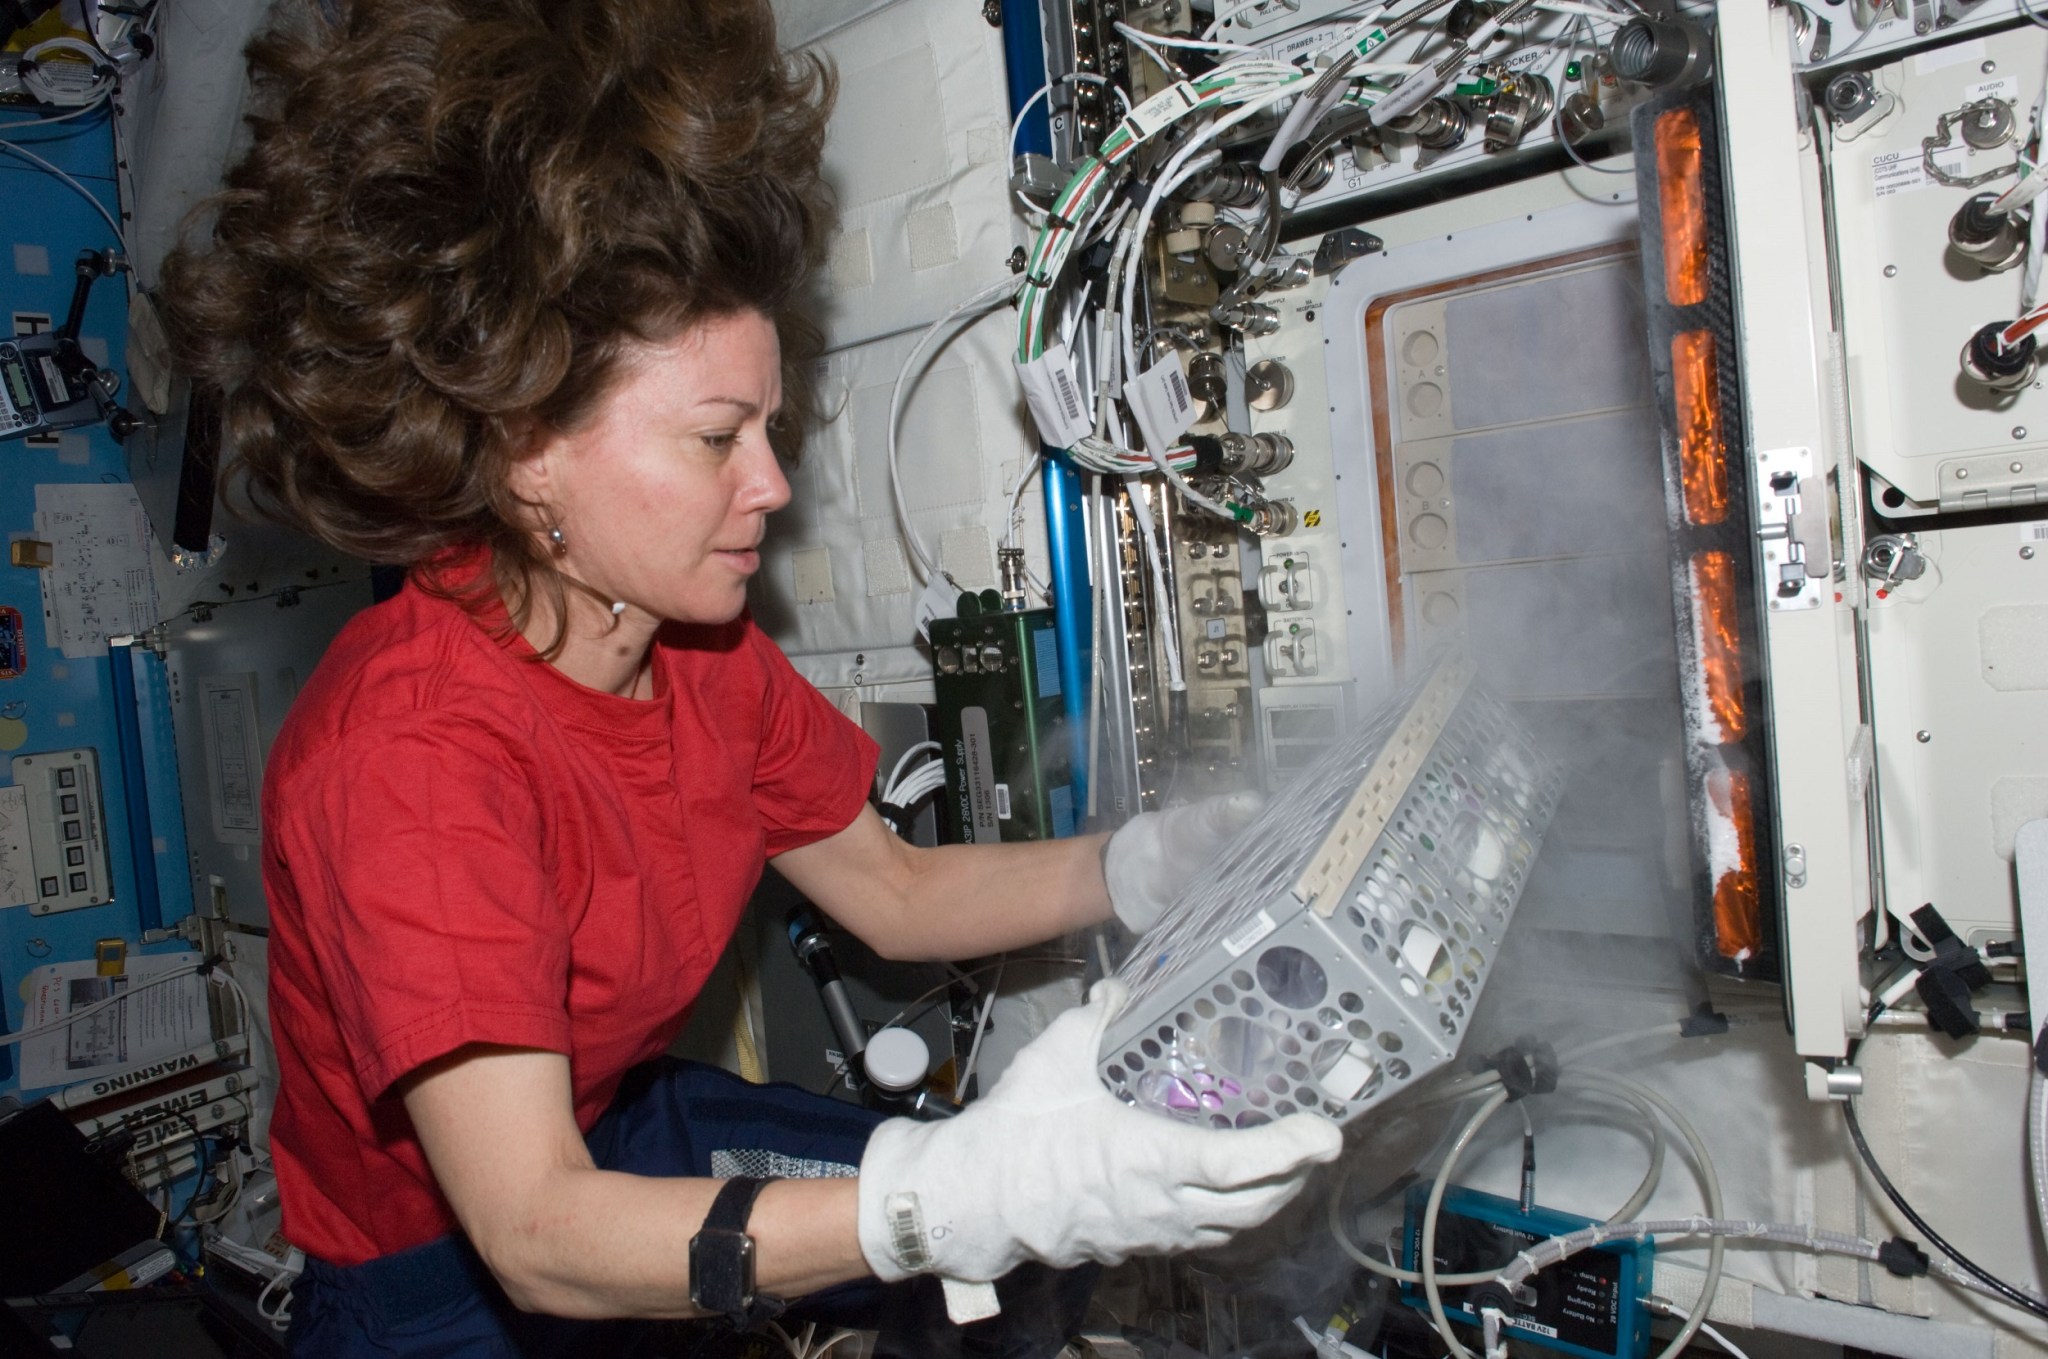 Coleman is wearing a red shirt and blue pants, long brown hair floating around her head. She has thick white gloves on her hands and holds a silver rectangular container that she just took out of a refrigerator. Vapor rises from the container and refrigerator.